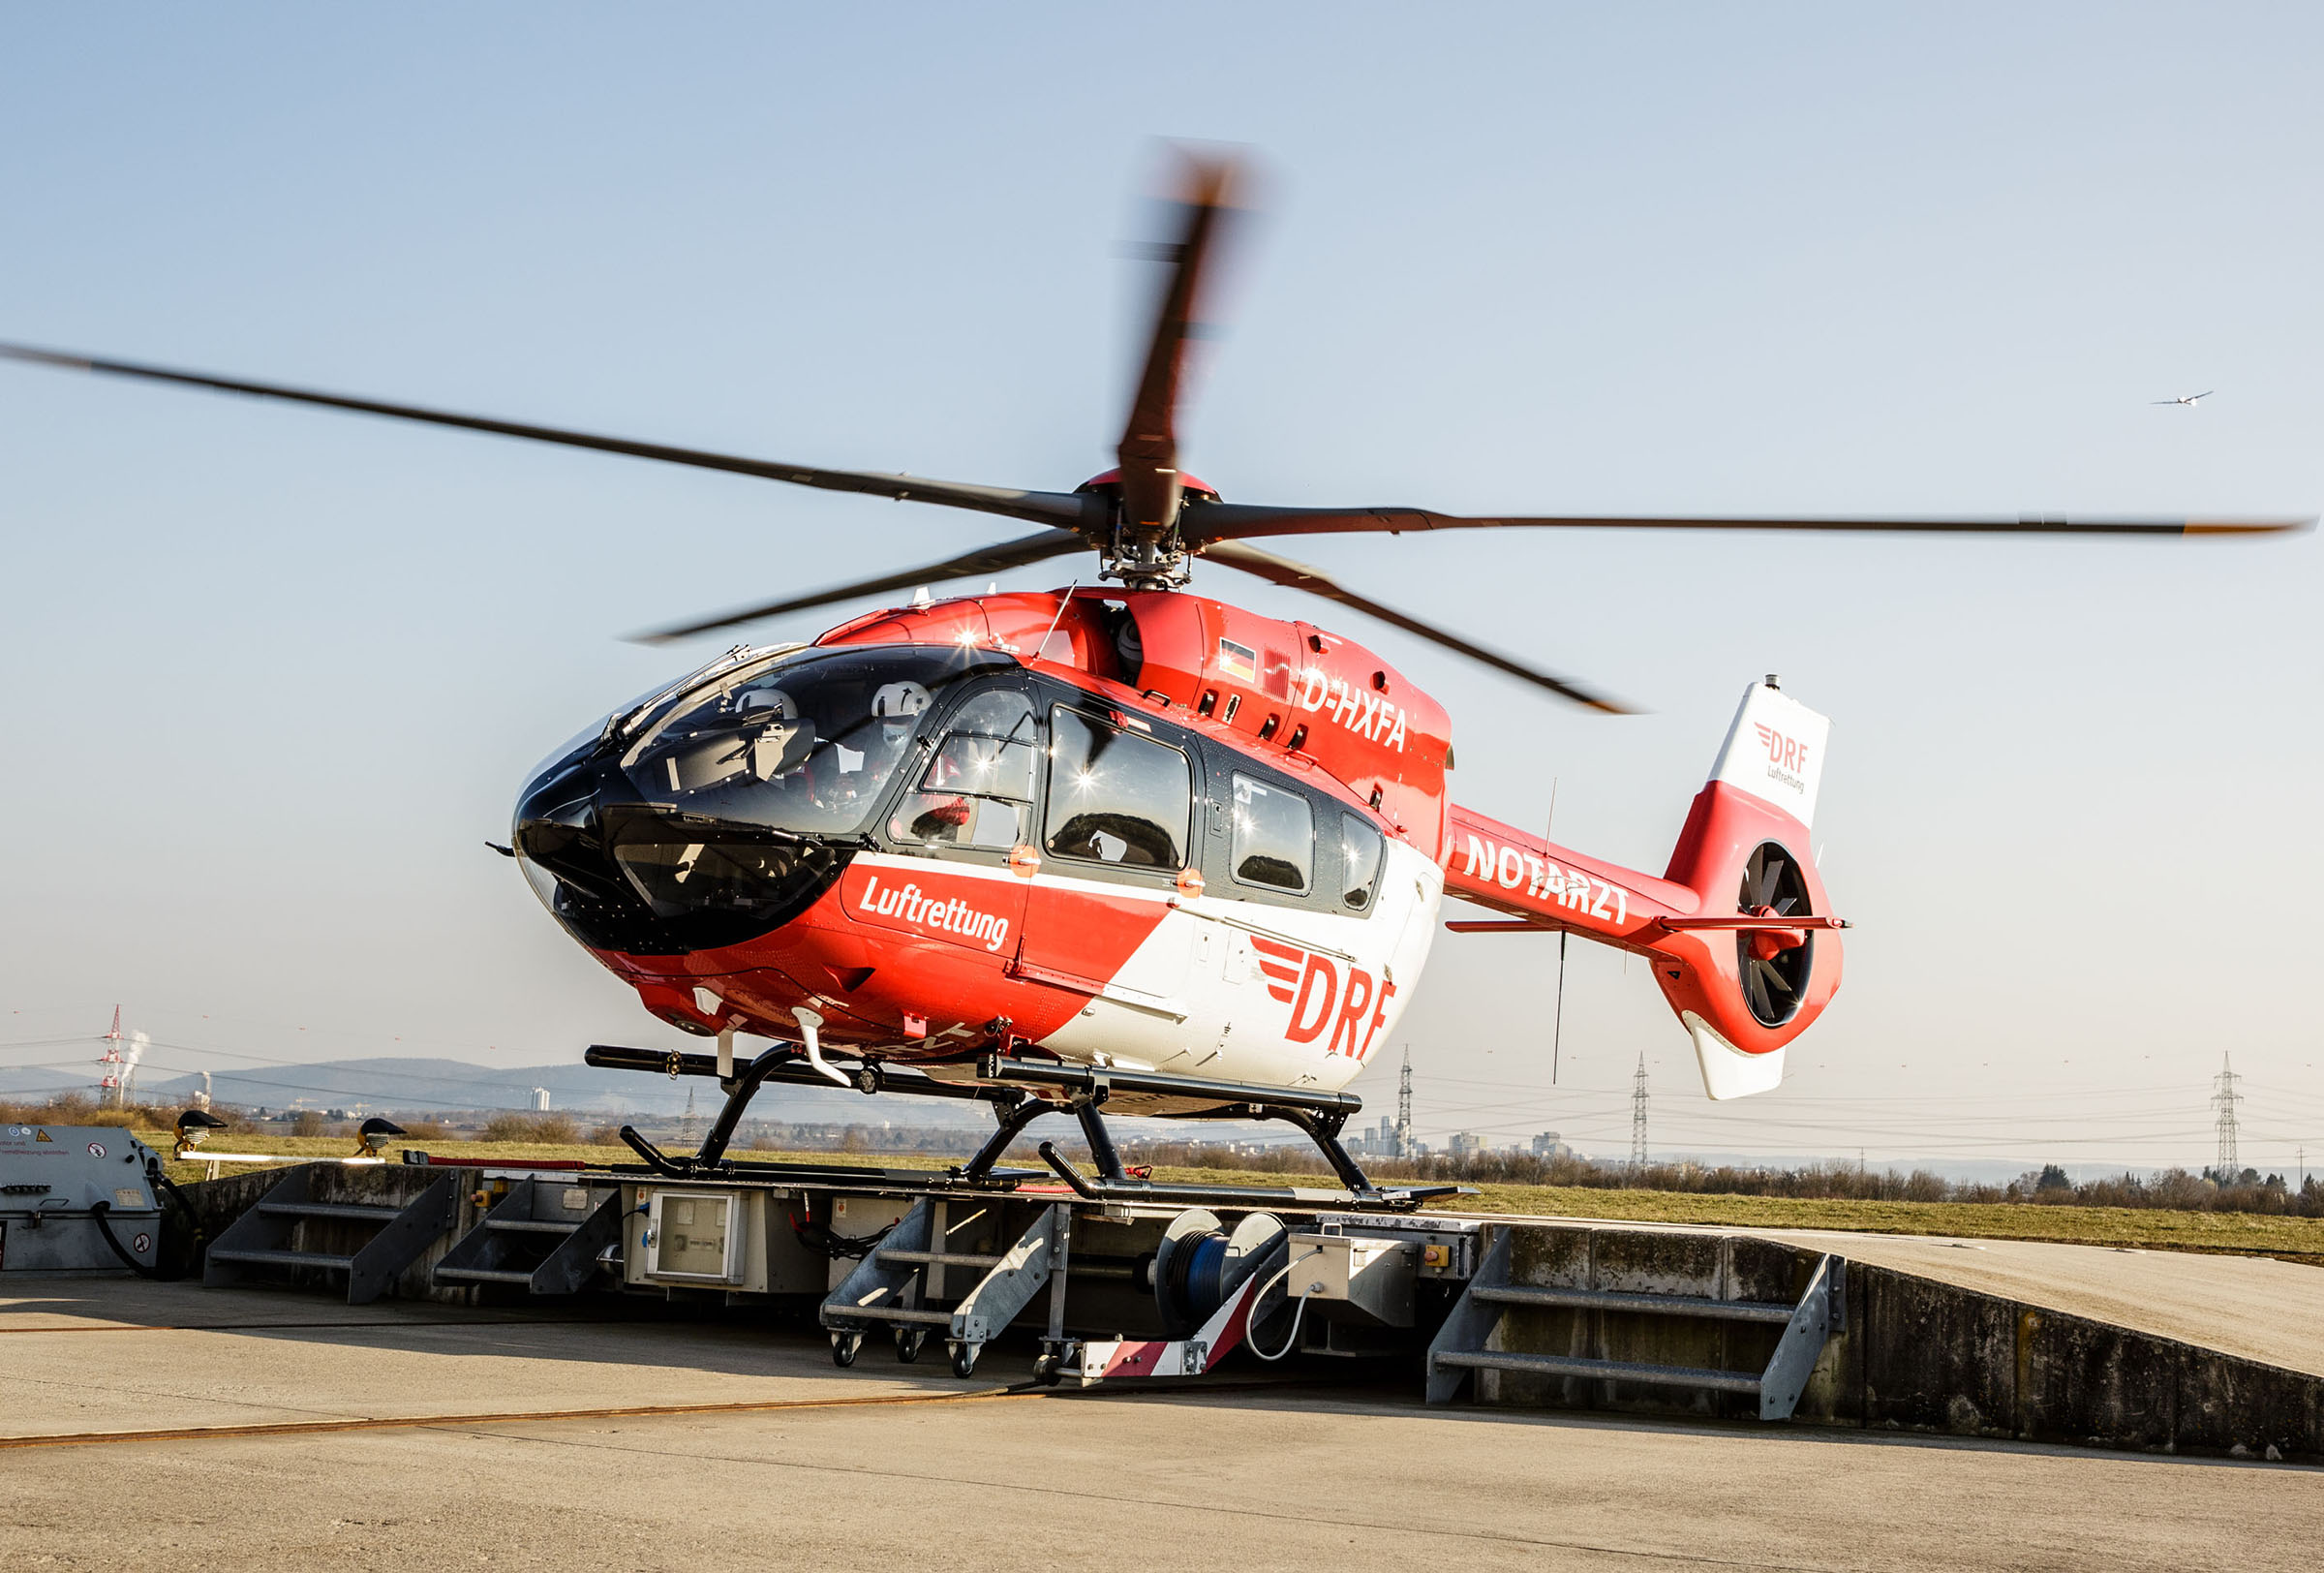 DRF skips European Rotors to concentrate on COVID response